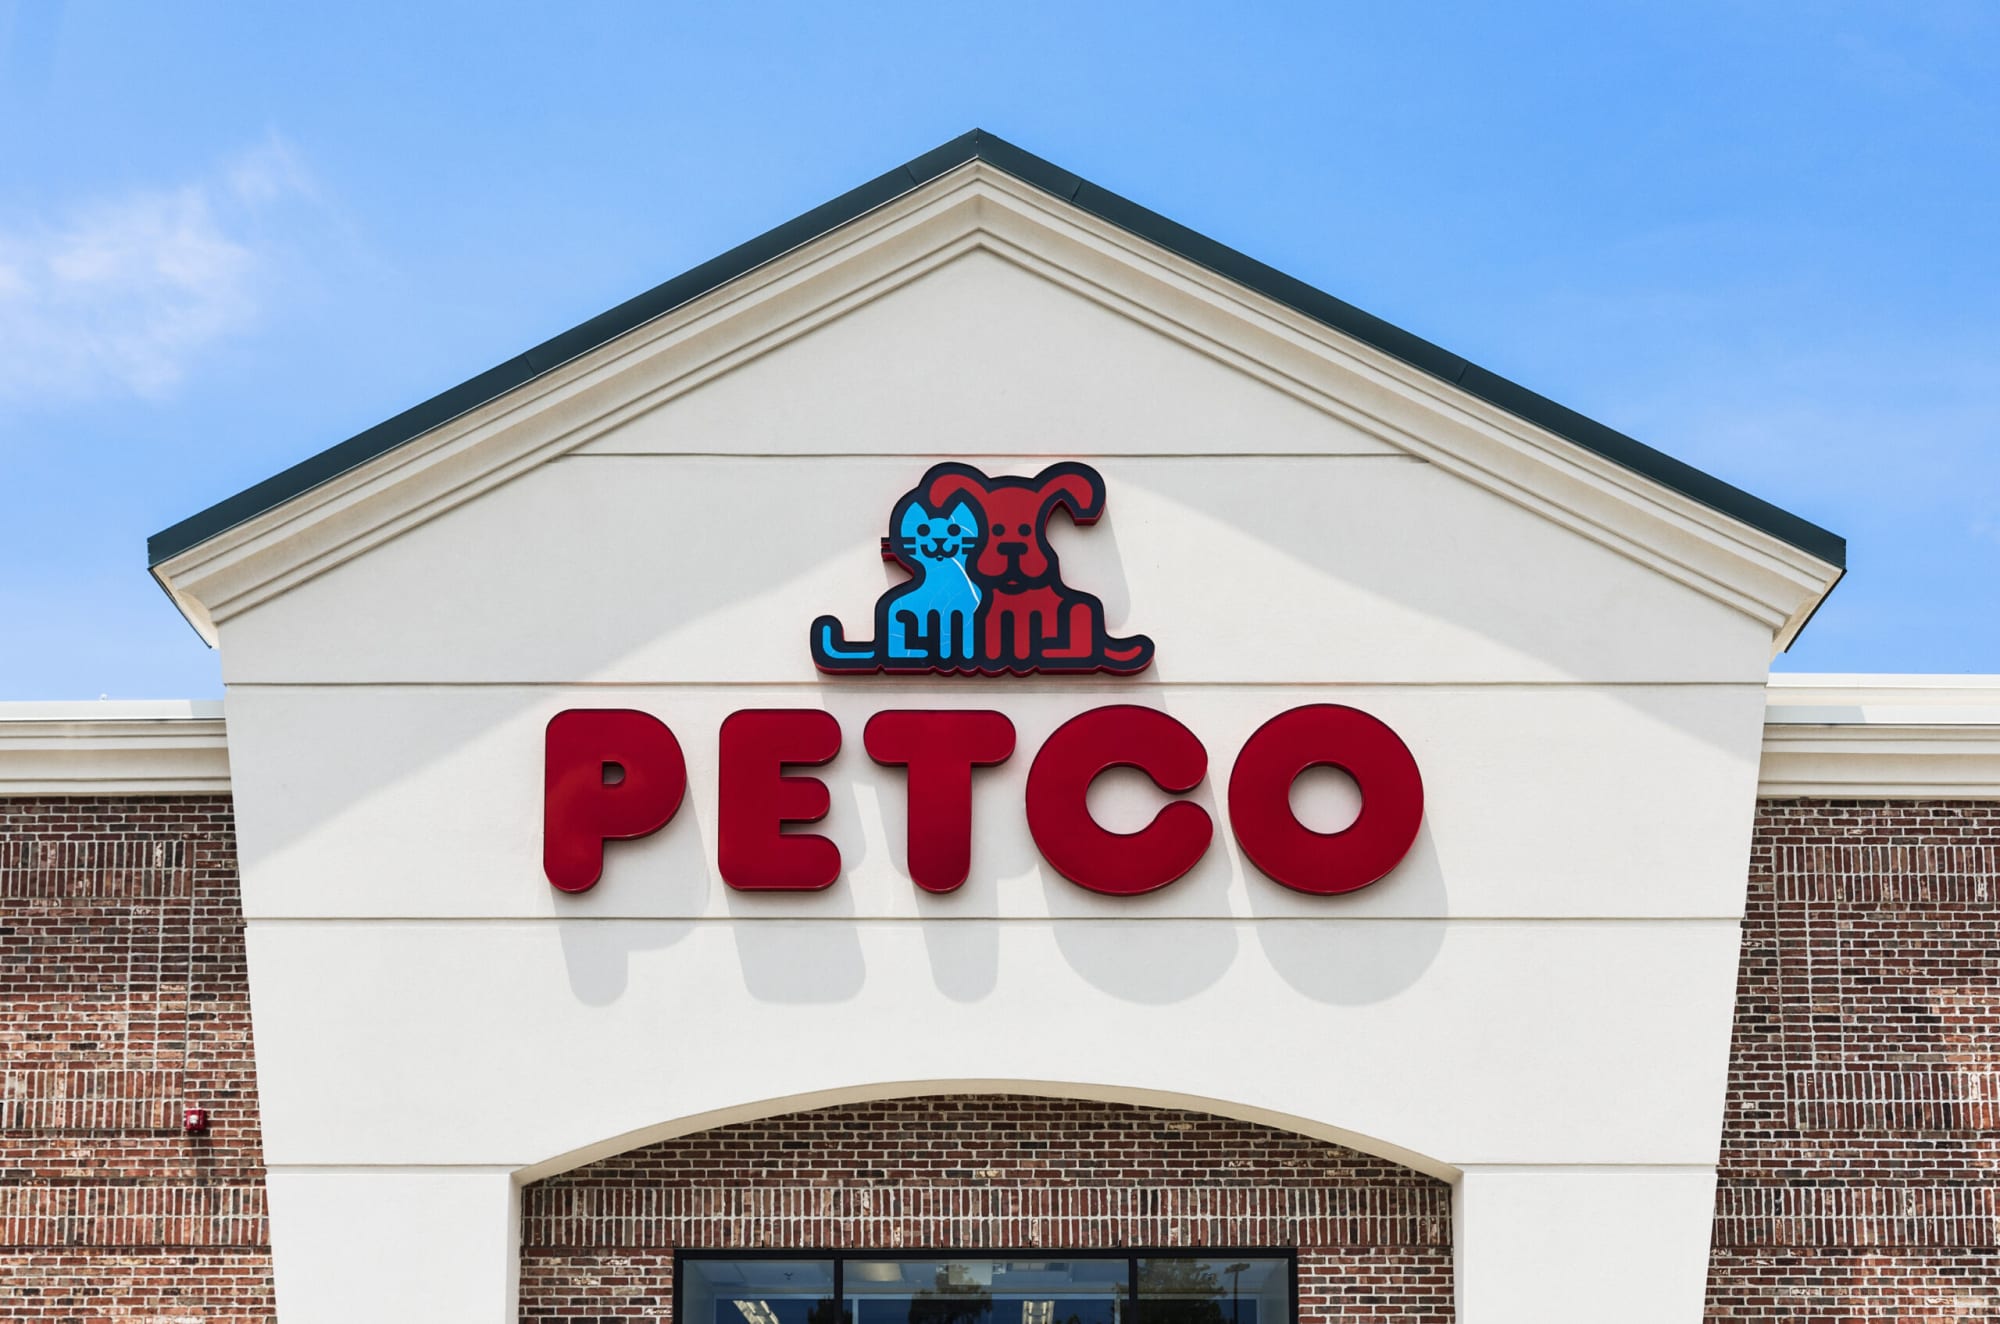 Petco celebrates Memorial Day Weekend with these deals